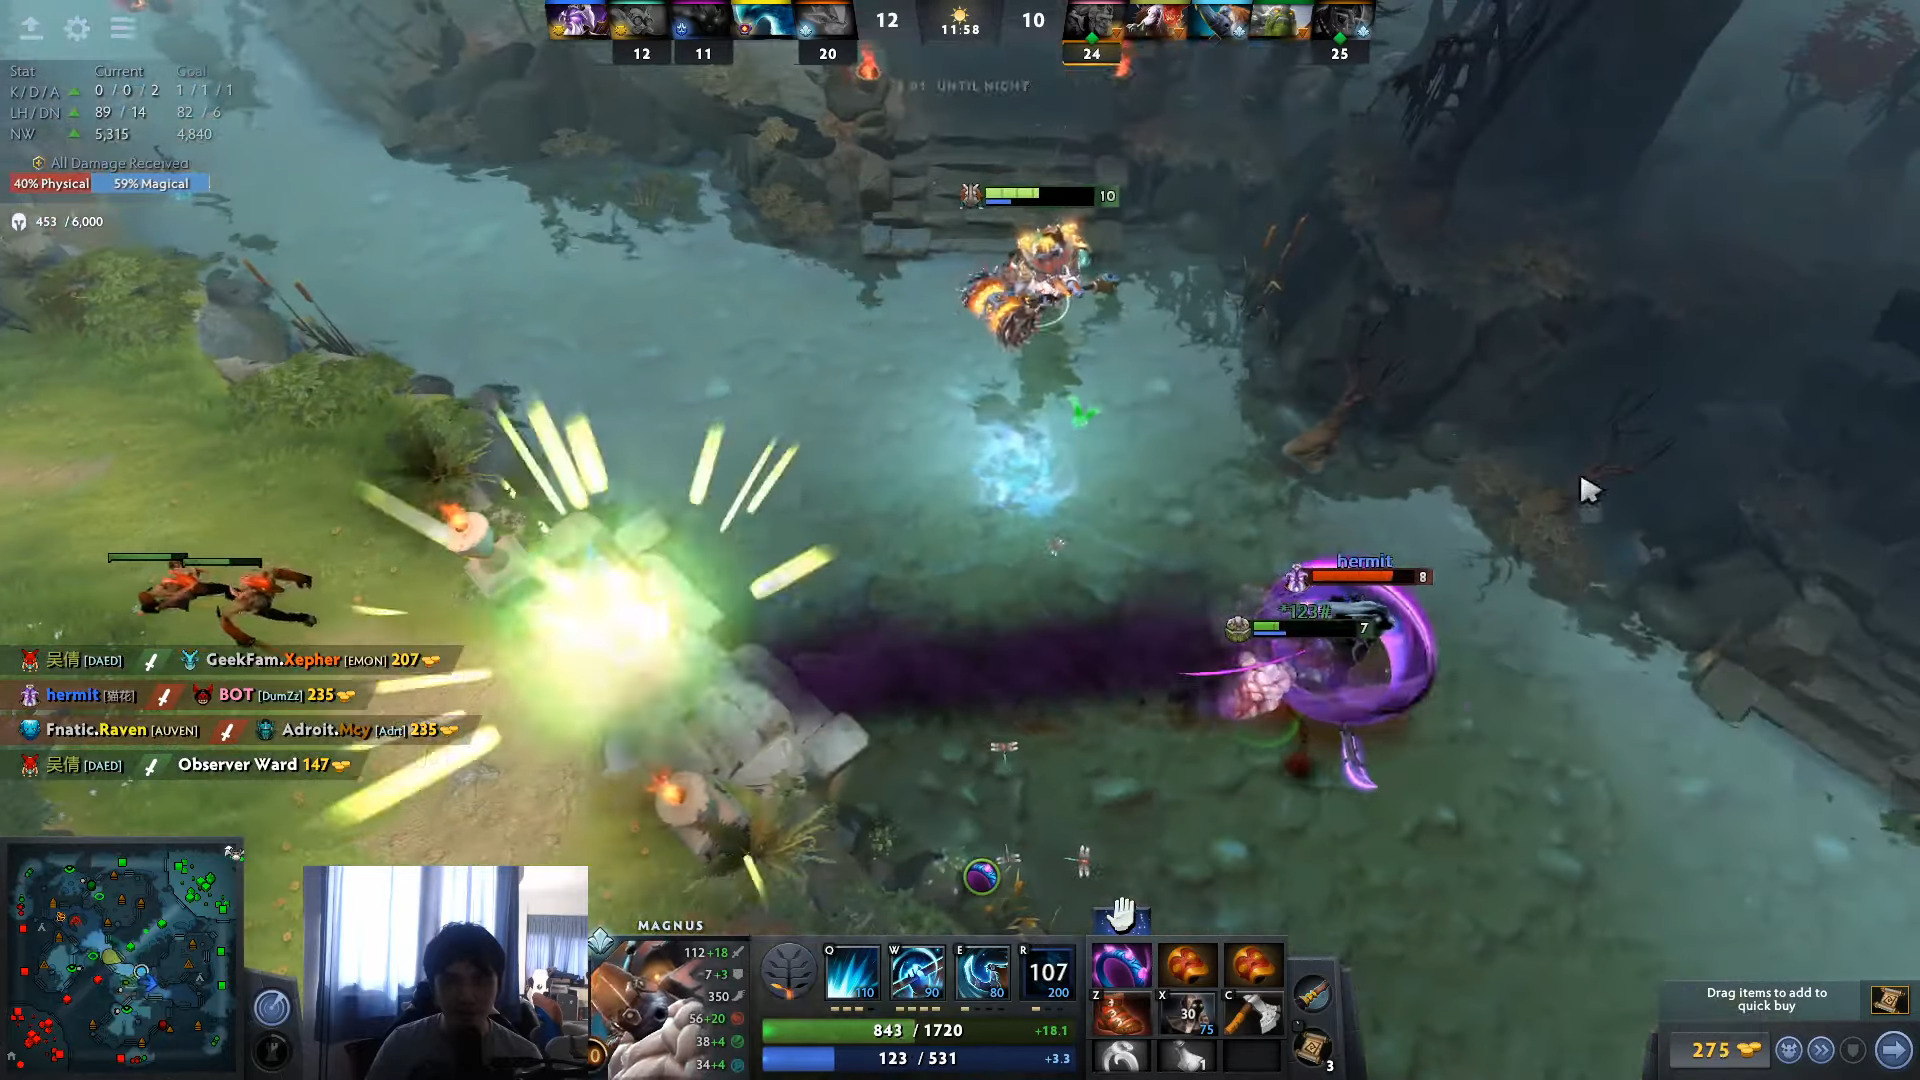 Iceiceice Joins the Evil Geniuses To Round Up The Team’s Dota 2 Lineup